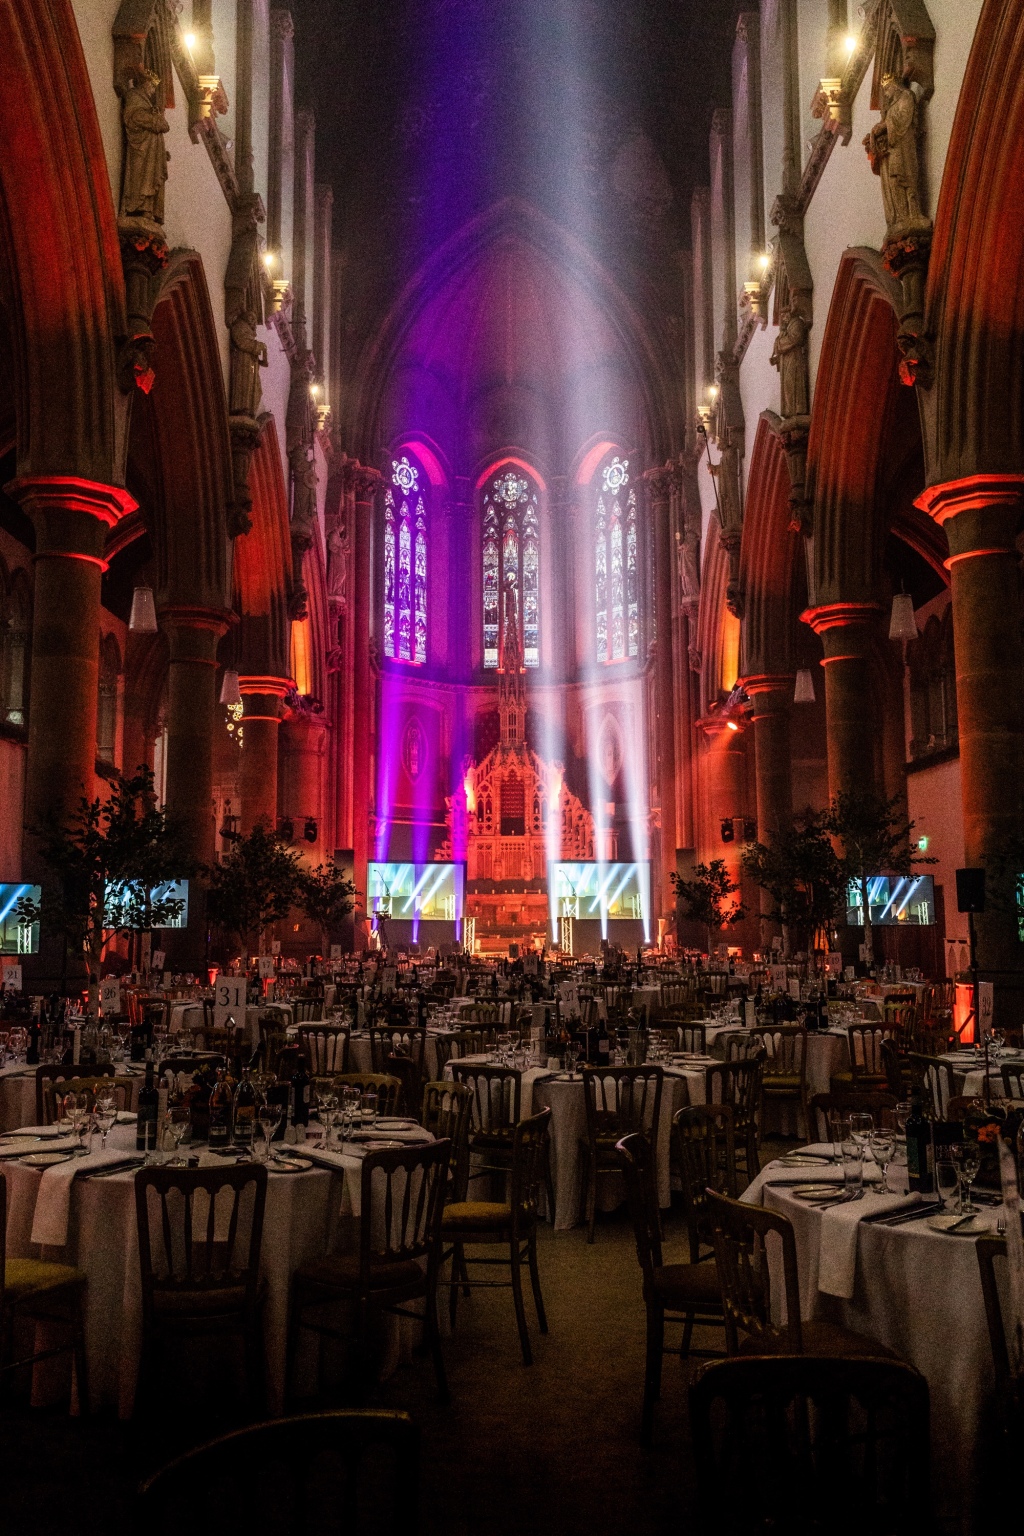 MANCHESTER FOOD AND DRINK FESTIVAL 2019 AWARDS SHORTLIST ANNOUNCED